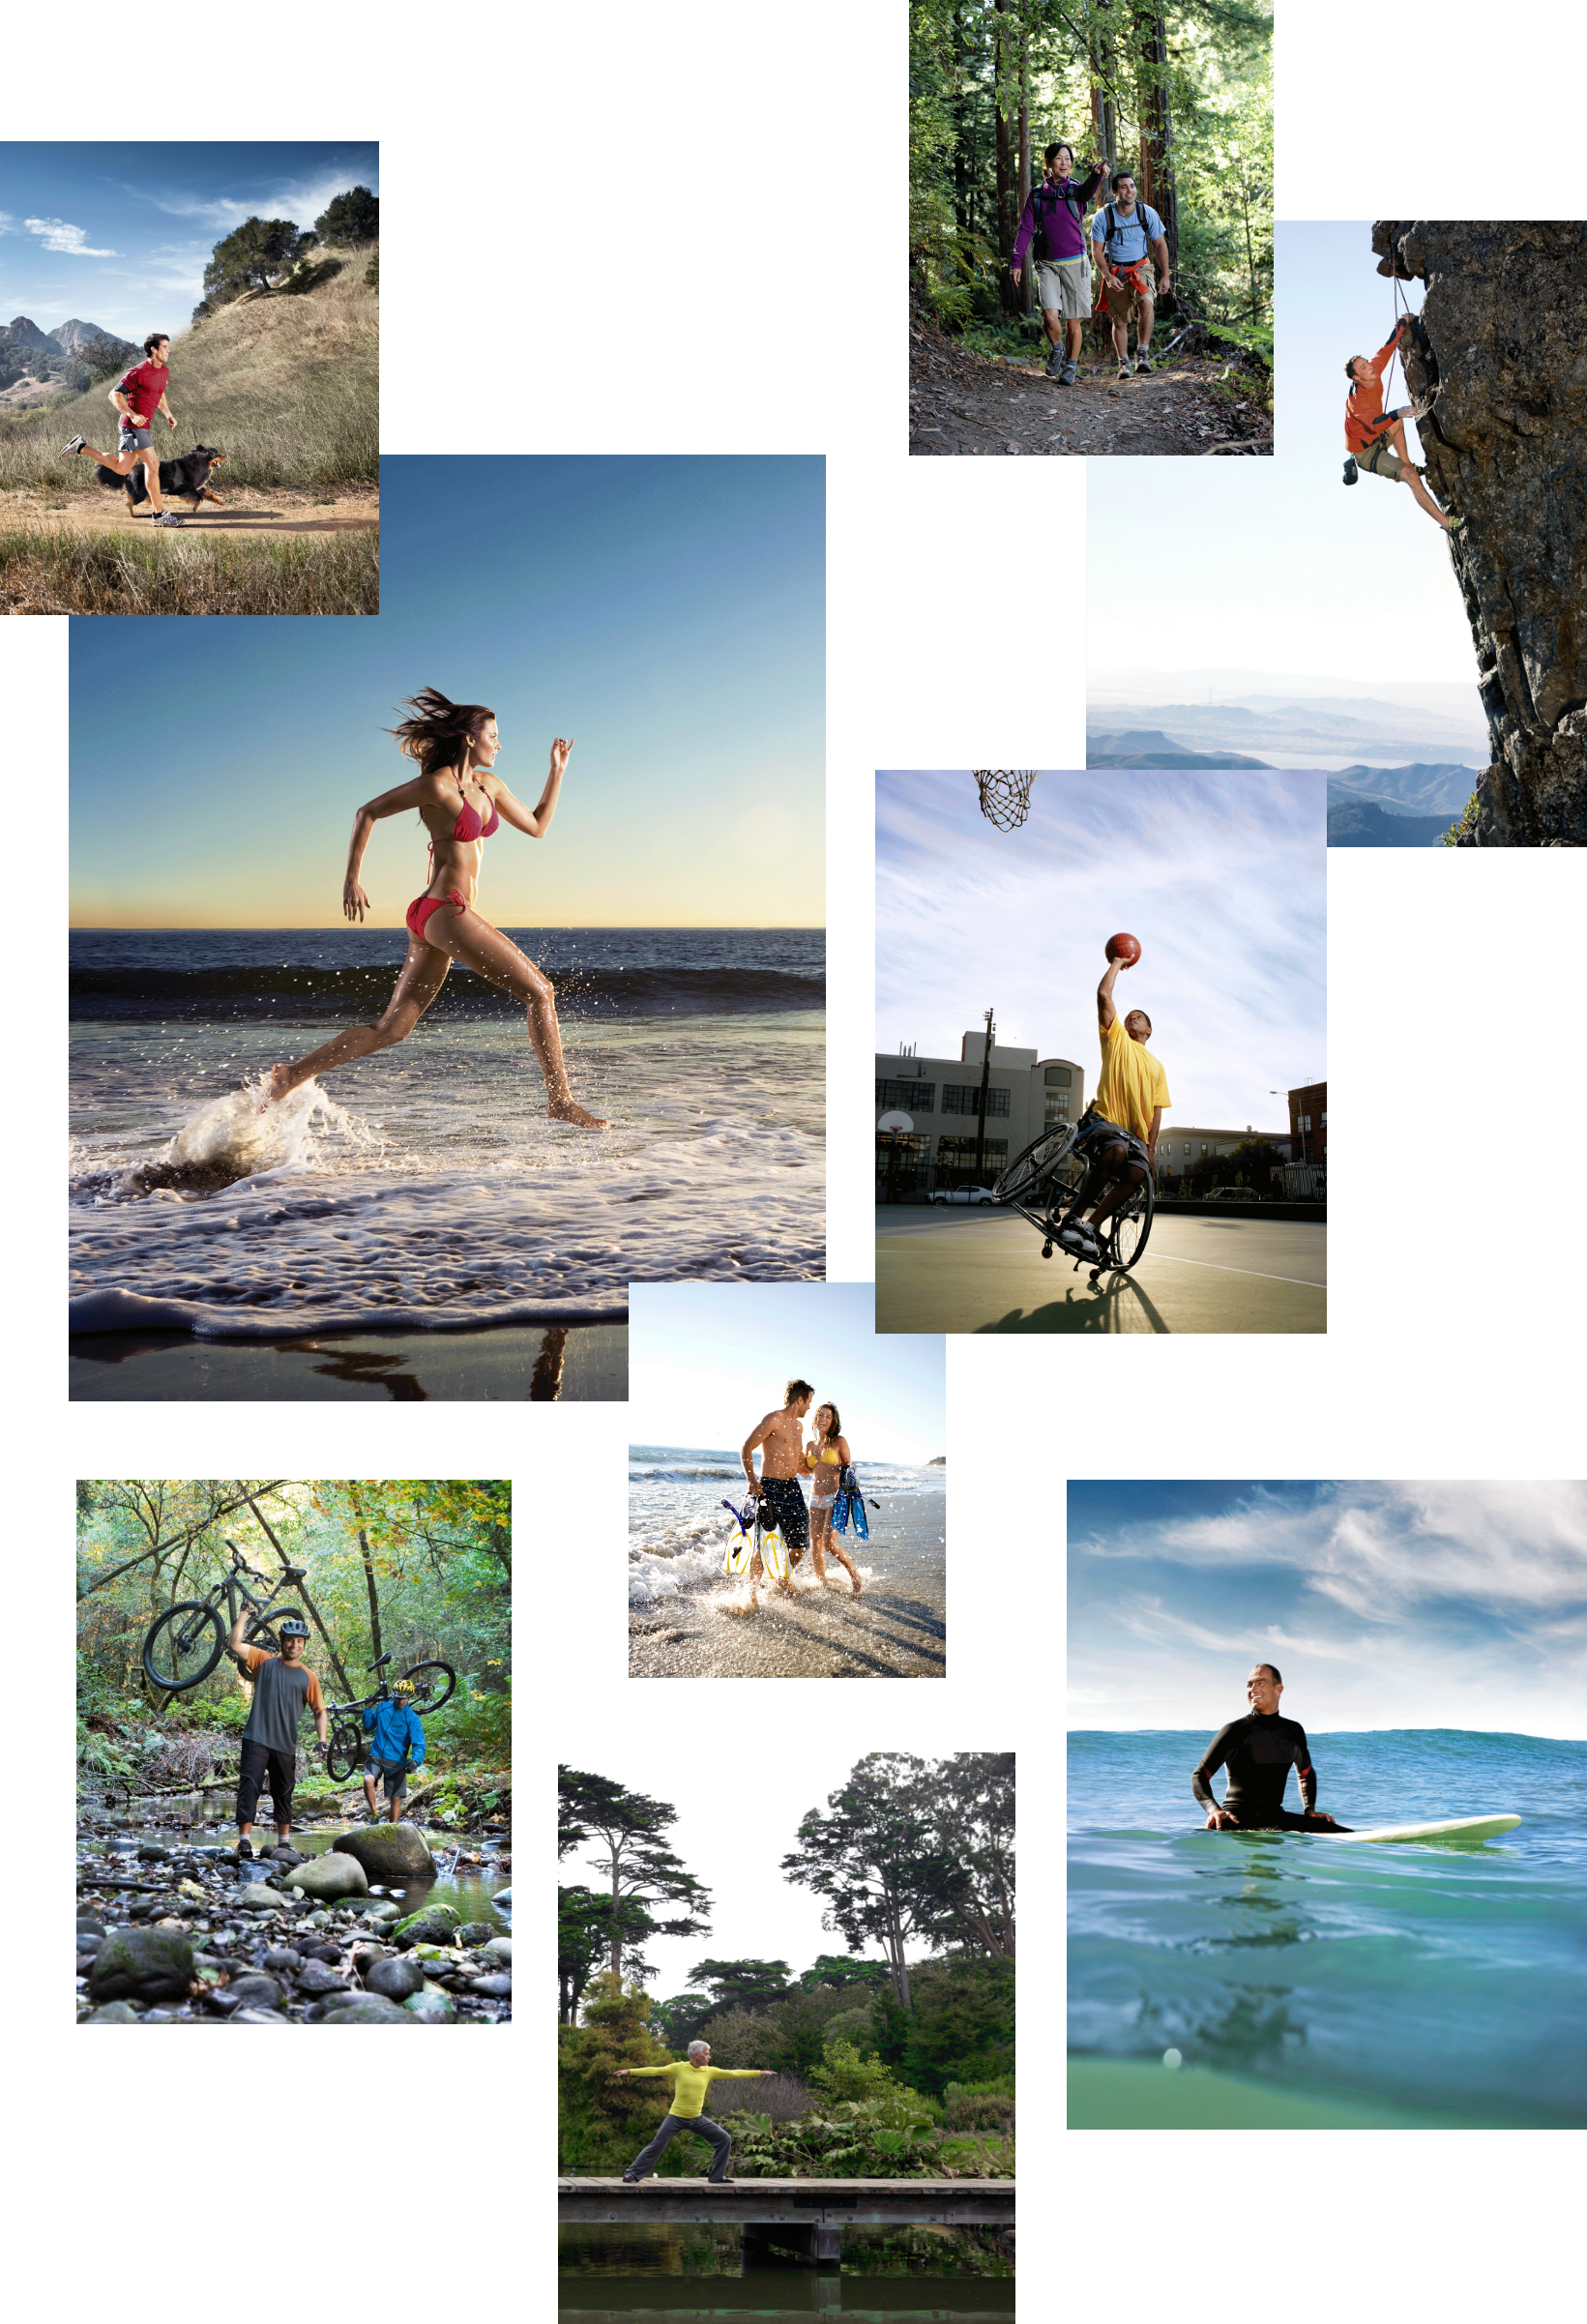 Collage of Various LifeFitness Hero Photos. Male Athlete running with dog. One Female and One Male hiker walking happily in forest. Male Mountain Climber climbing mountain. Female Athlete running on beach. Male athlete in wheelchair shooting a basket ball extending arm to shoot basketball in hoop. One Male and One Female diver standing ankle deep in water at beach in late afternoon. Two Male Bikers carrying bike throw rocky stream. Senior Male doing Yogo on wooden bridge over water surrounded by forest. Male surfer on surfboard, smiling.